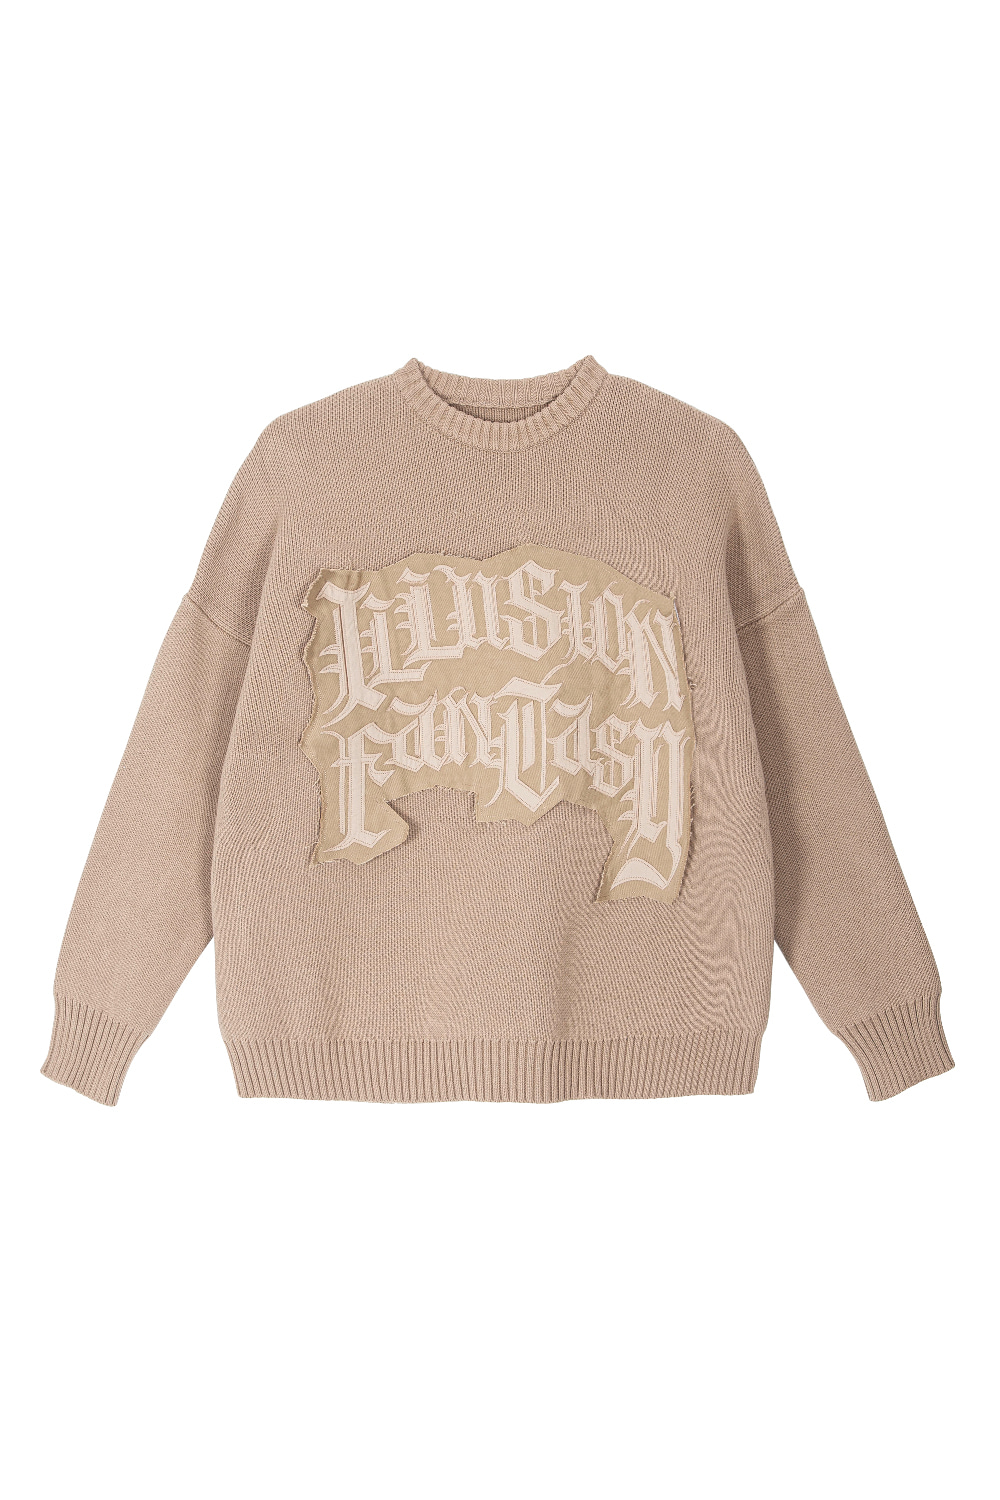 ILLUSION FANTASY HEAVY KNIT SWEATER (SAND)GRAFFITIONMIND